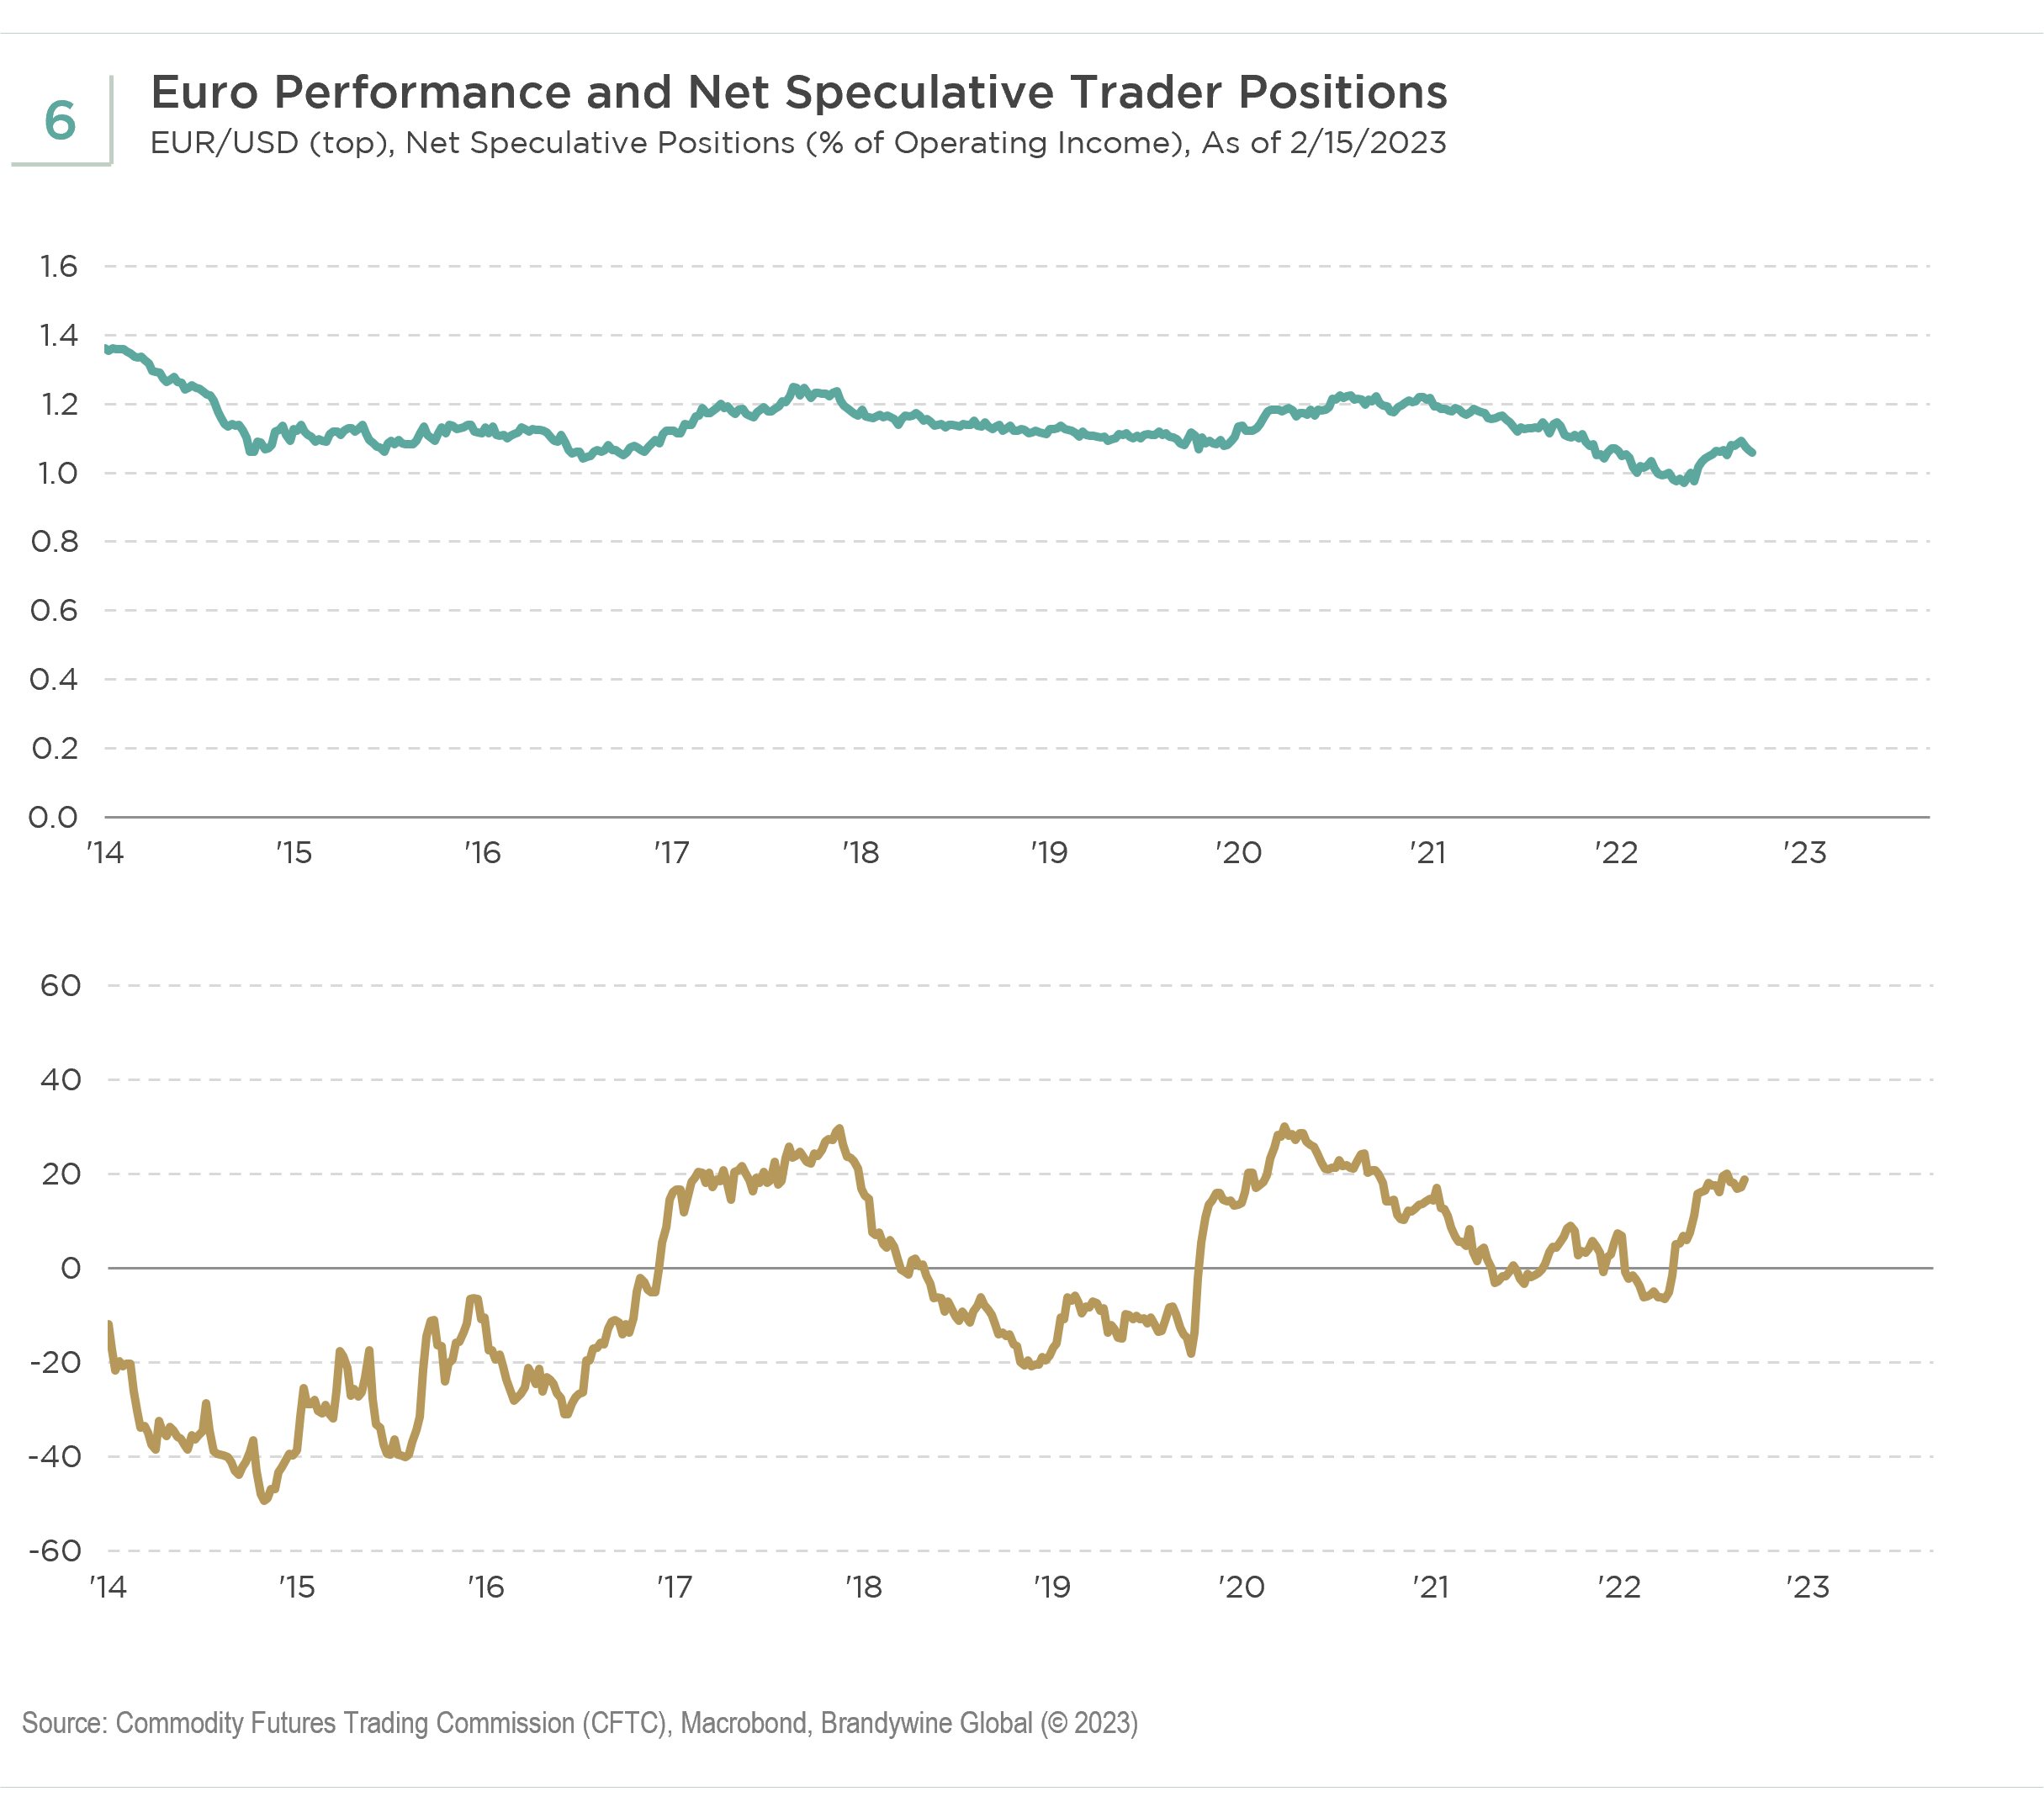 Chart 6: Euro Performance and Net Speculative Positions